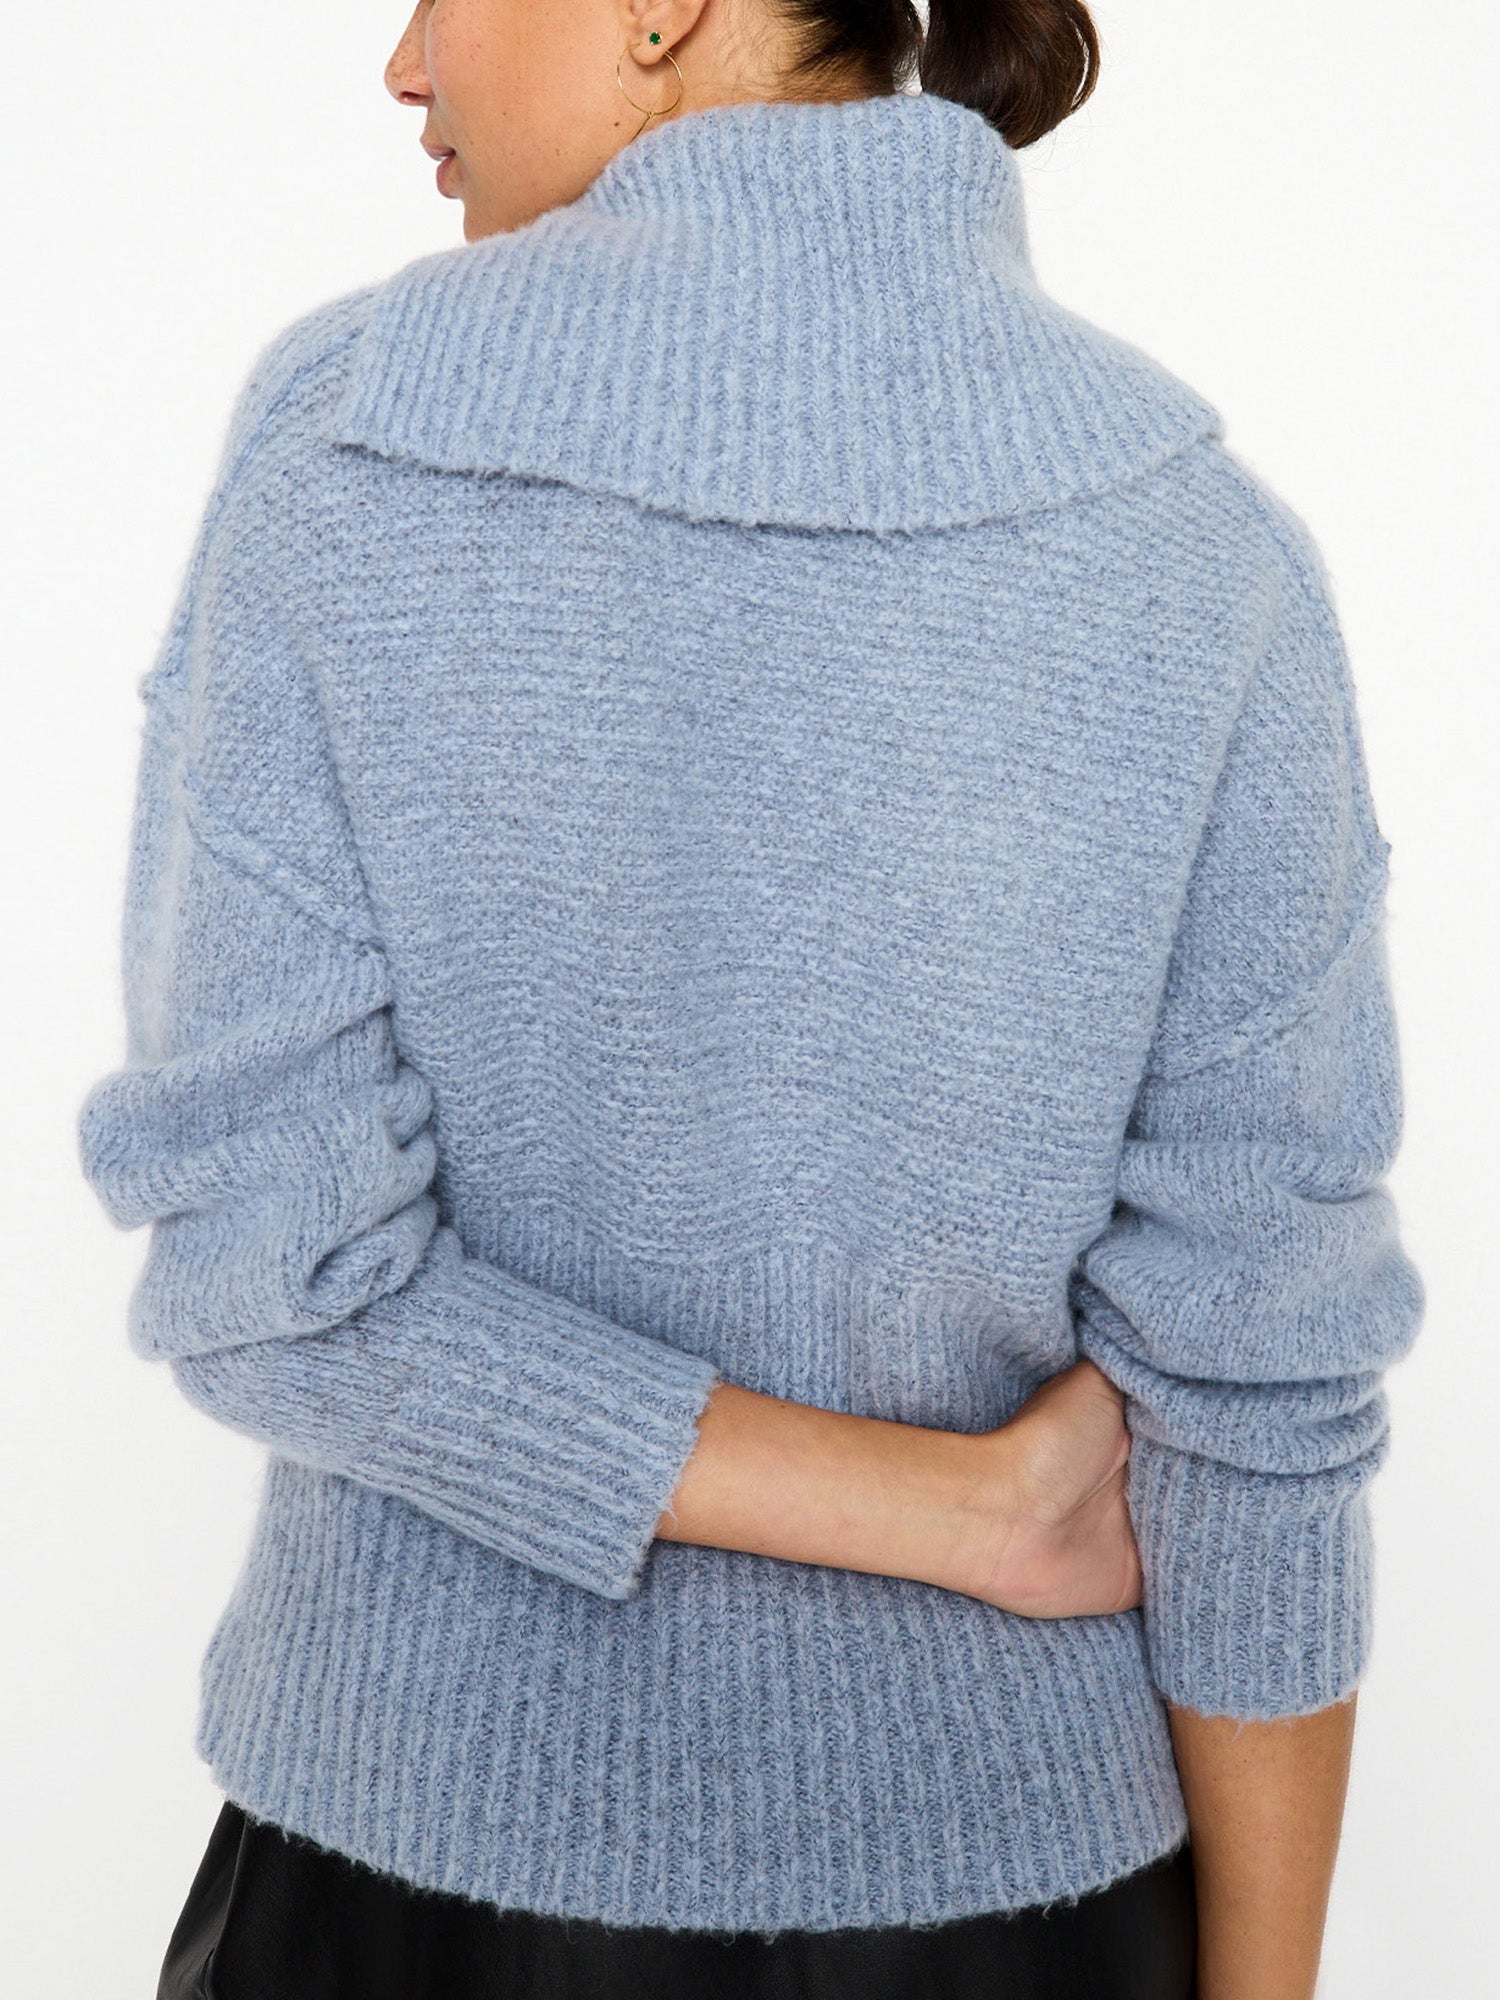 Elian overlap cowlneck wool cashmere blue sweater back view